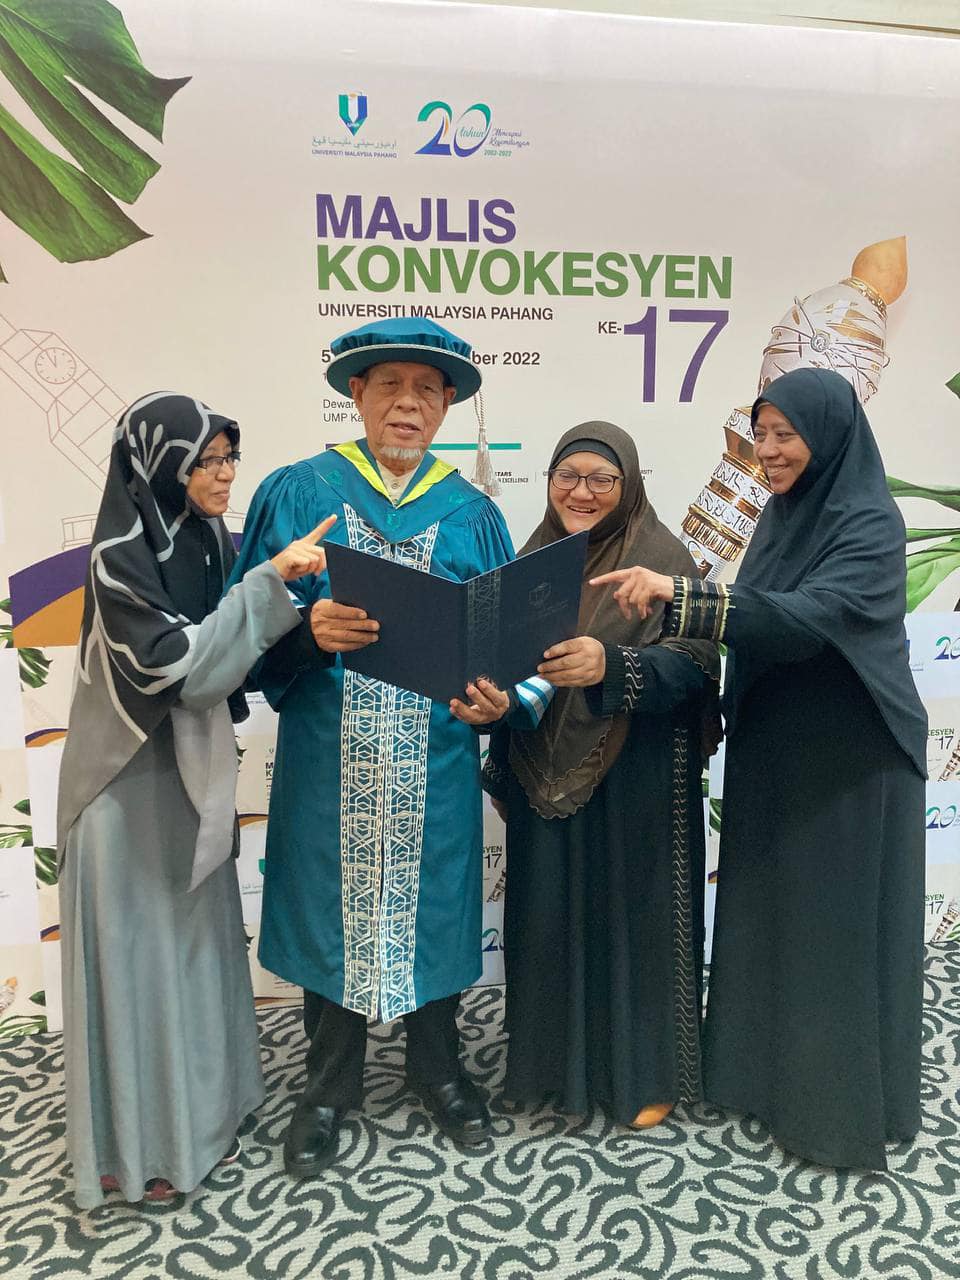 Age 83 is not a hindrance Dr. Jahid gets a second PhD